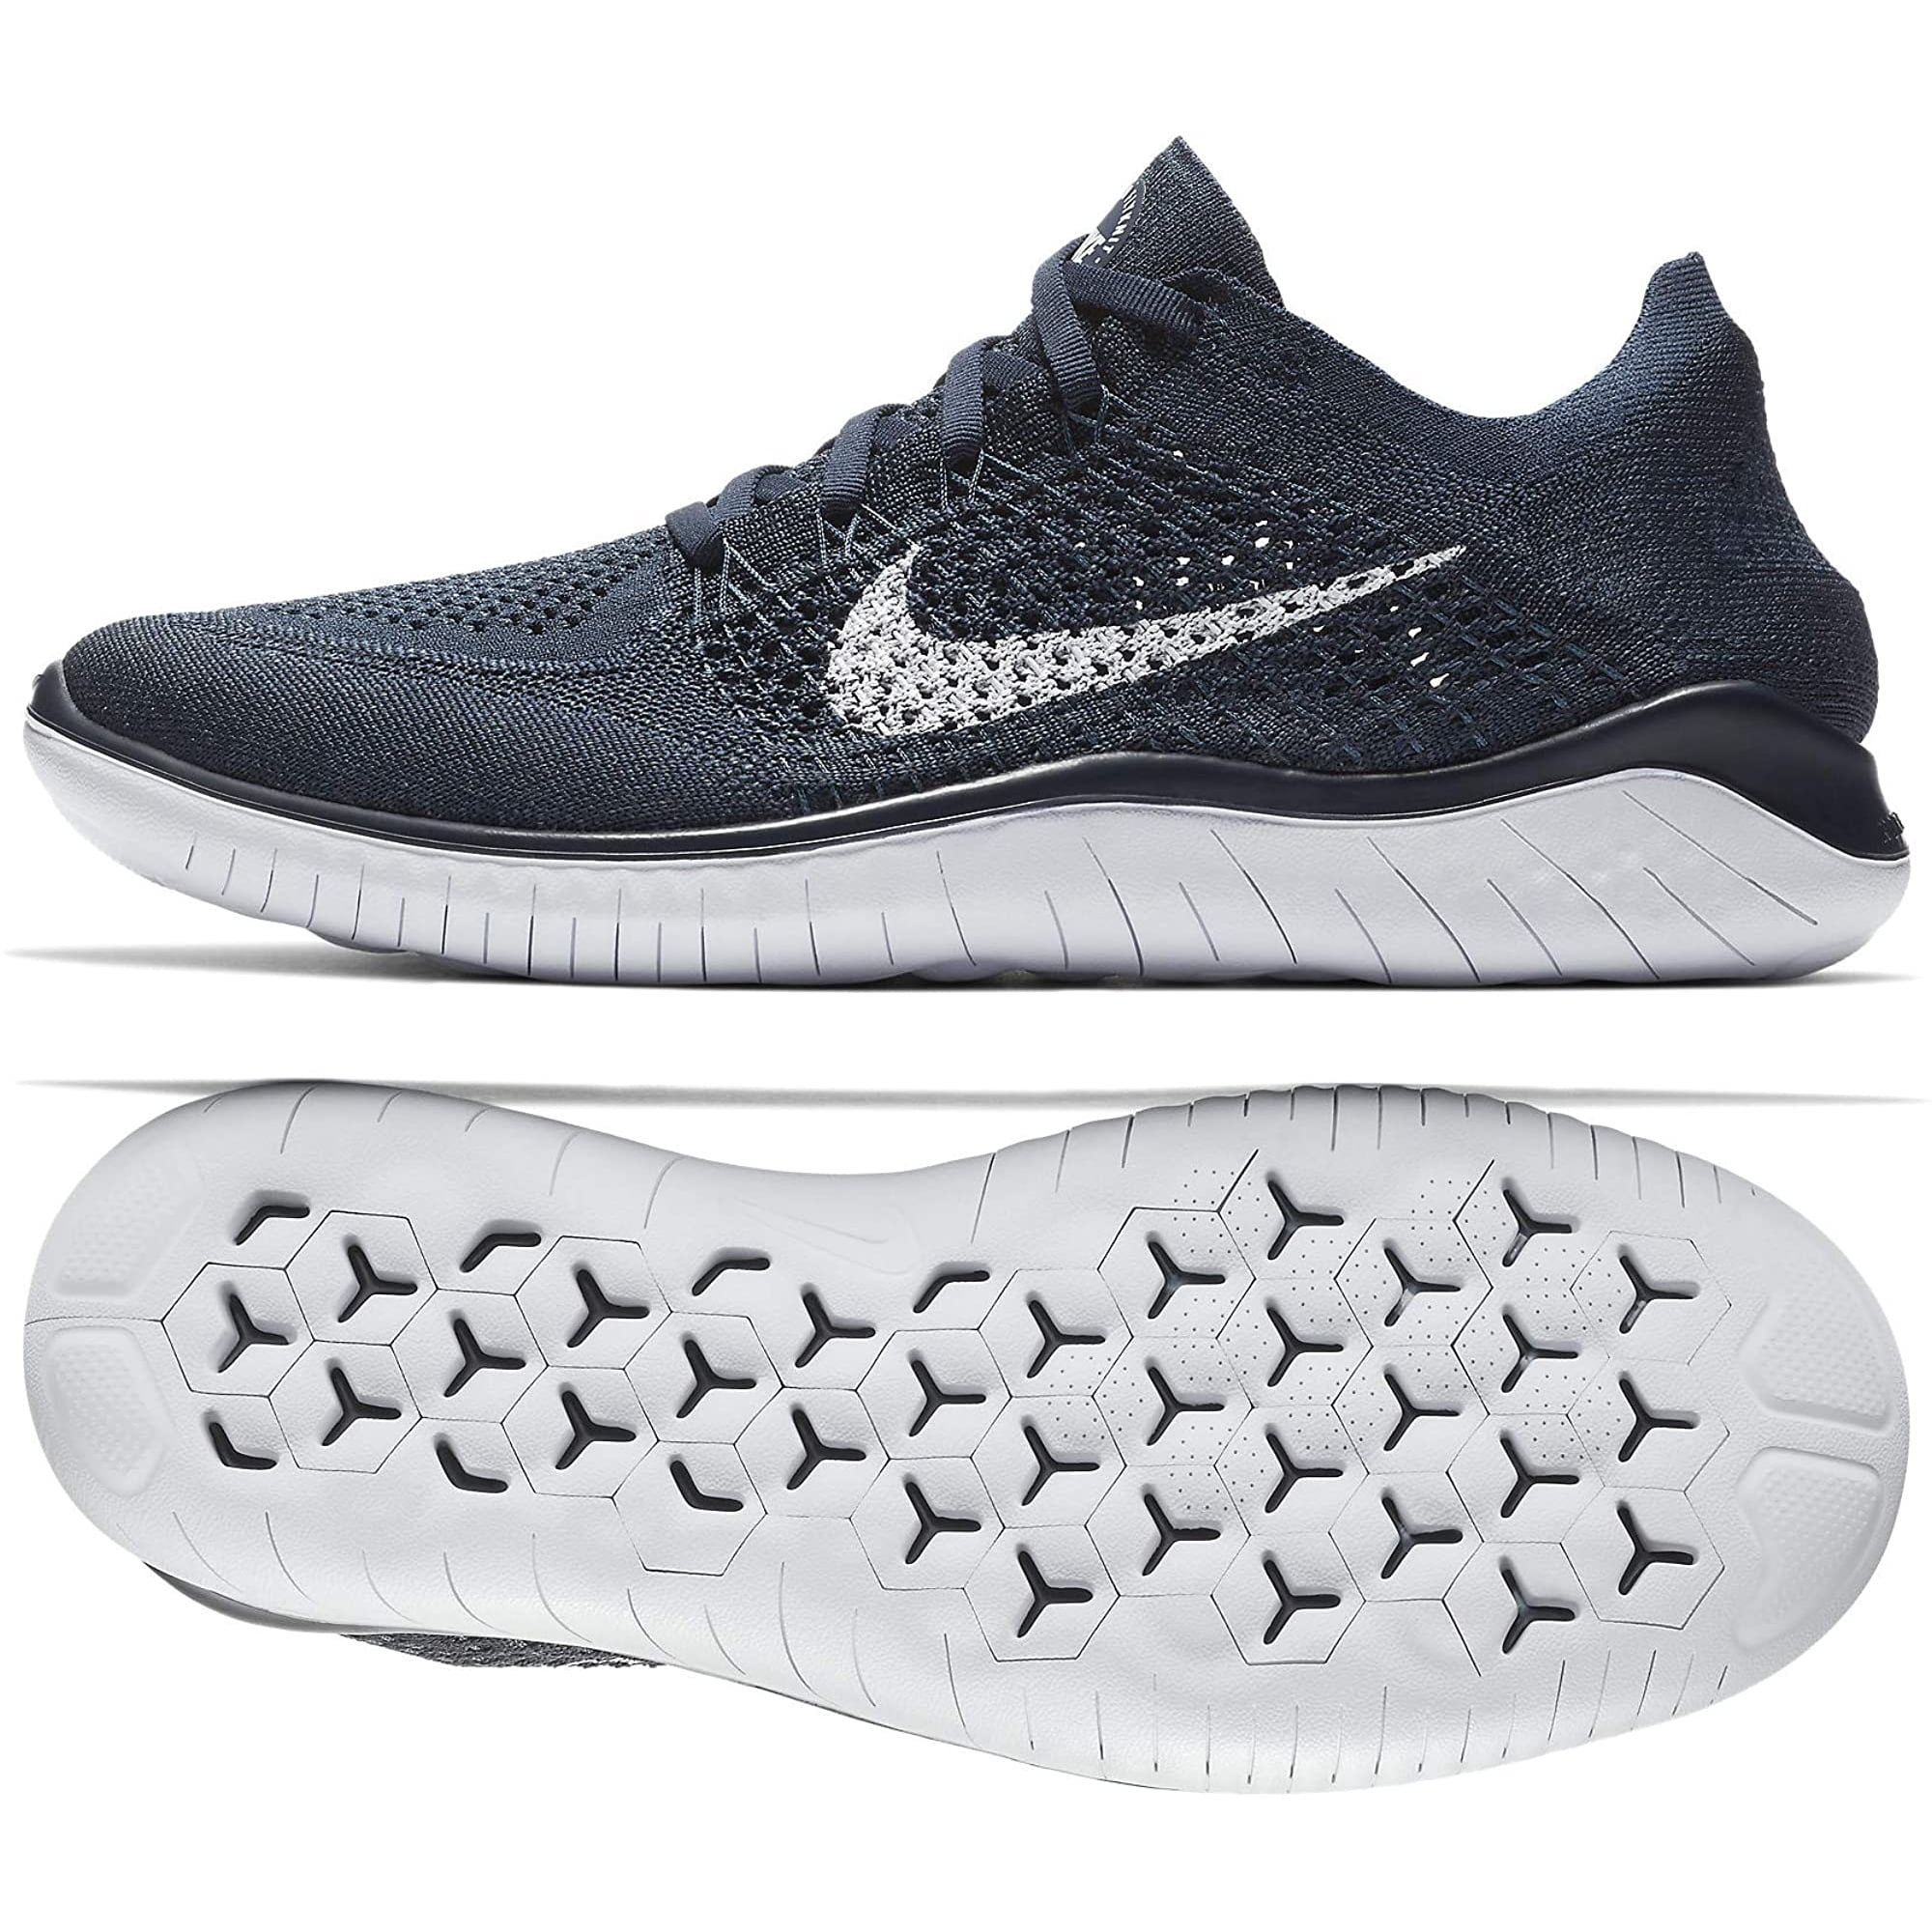 Mens Free Flyknit 2018 Running Shoes Navy/White | Walmart Canada